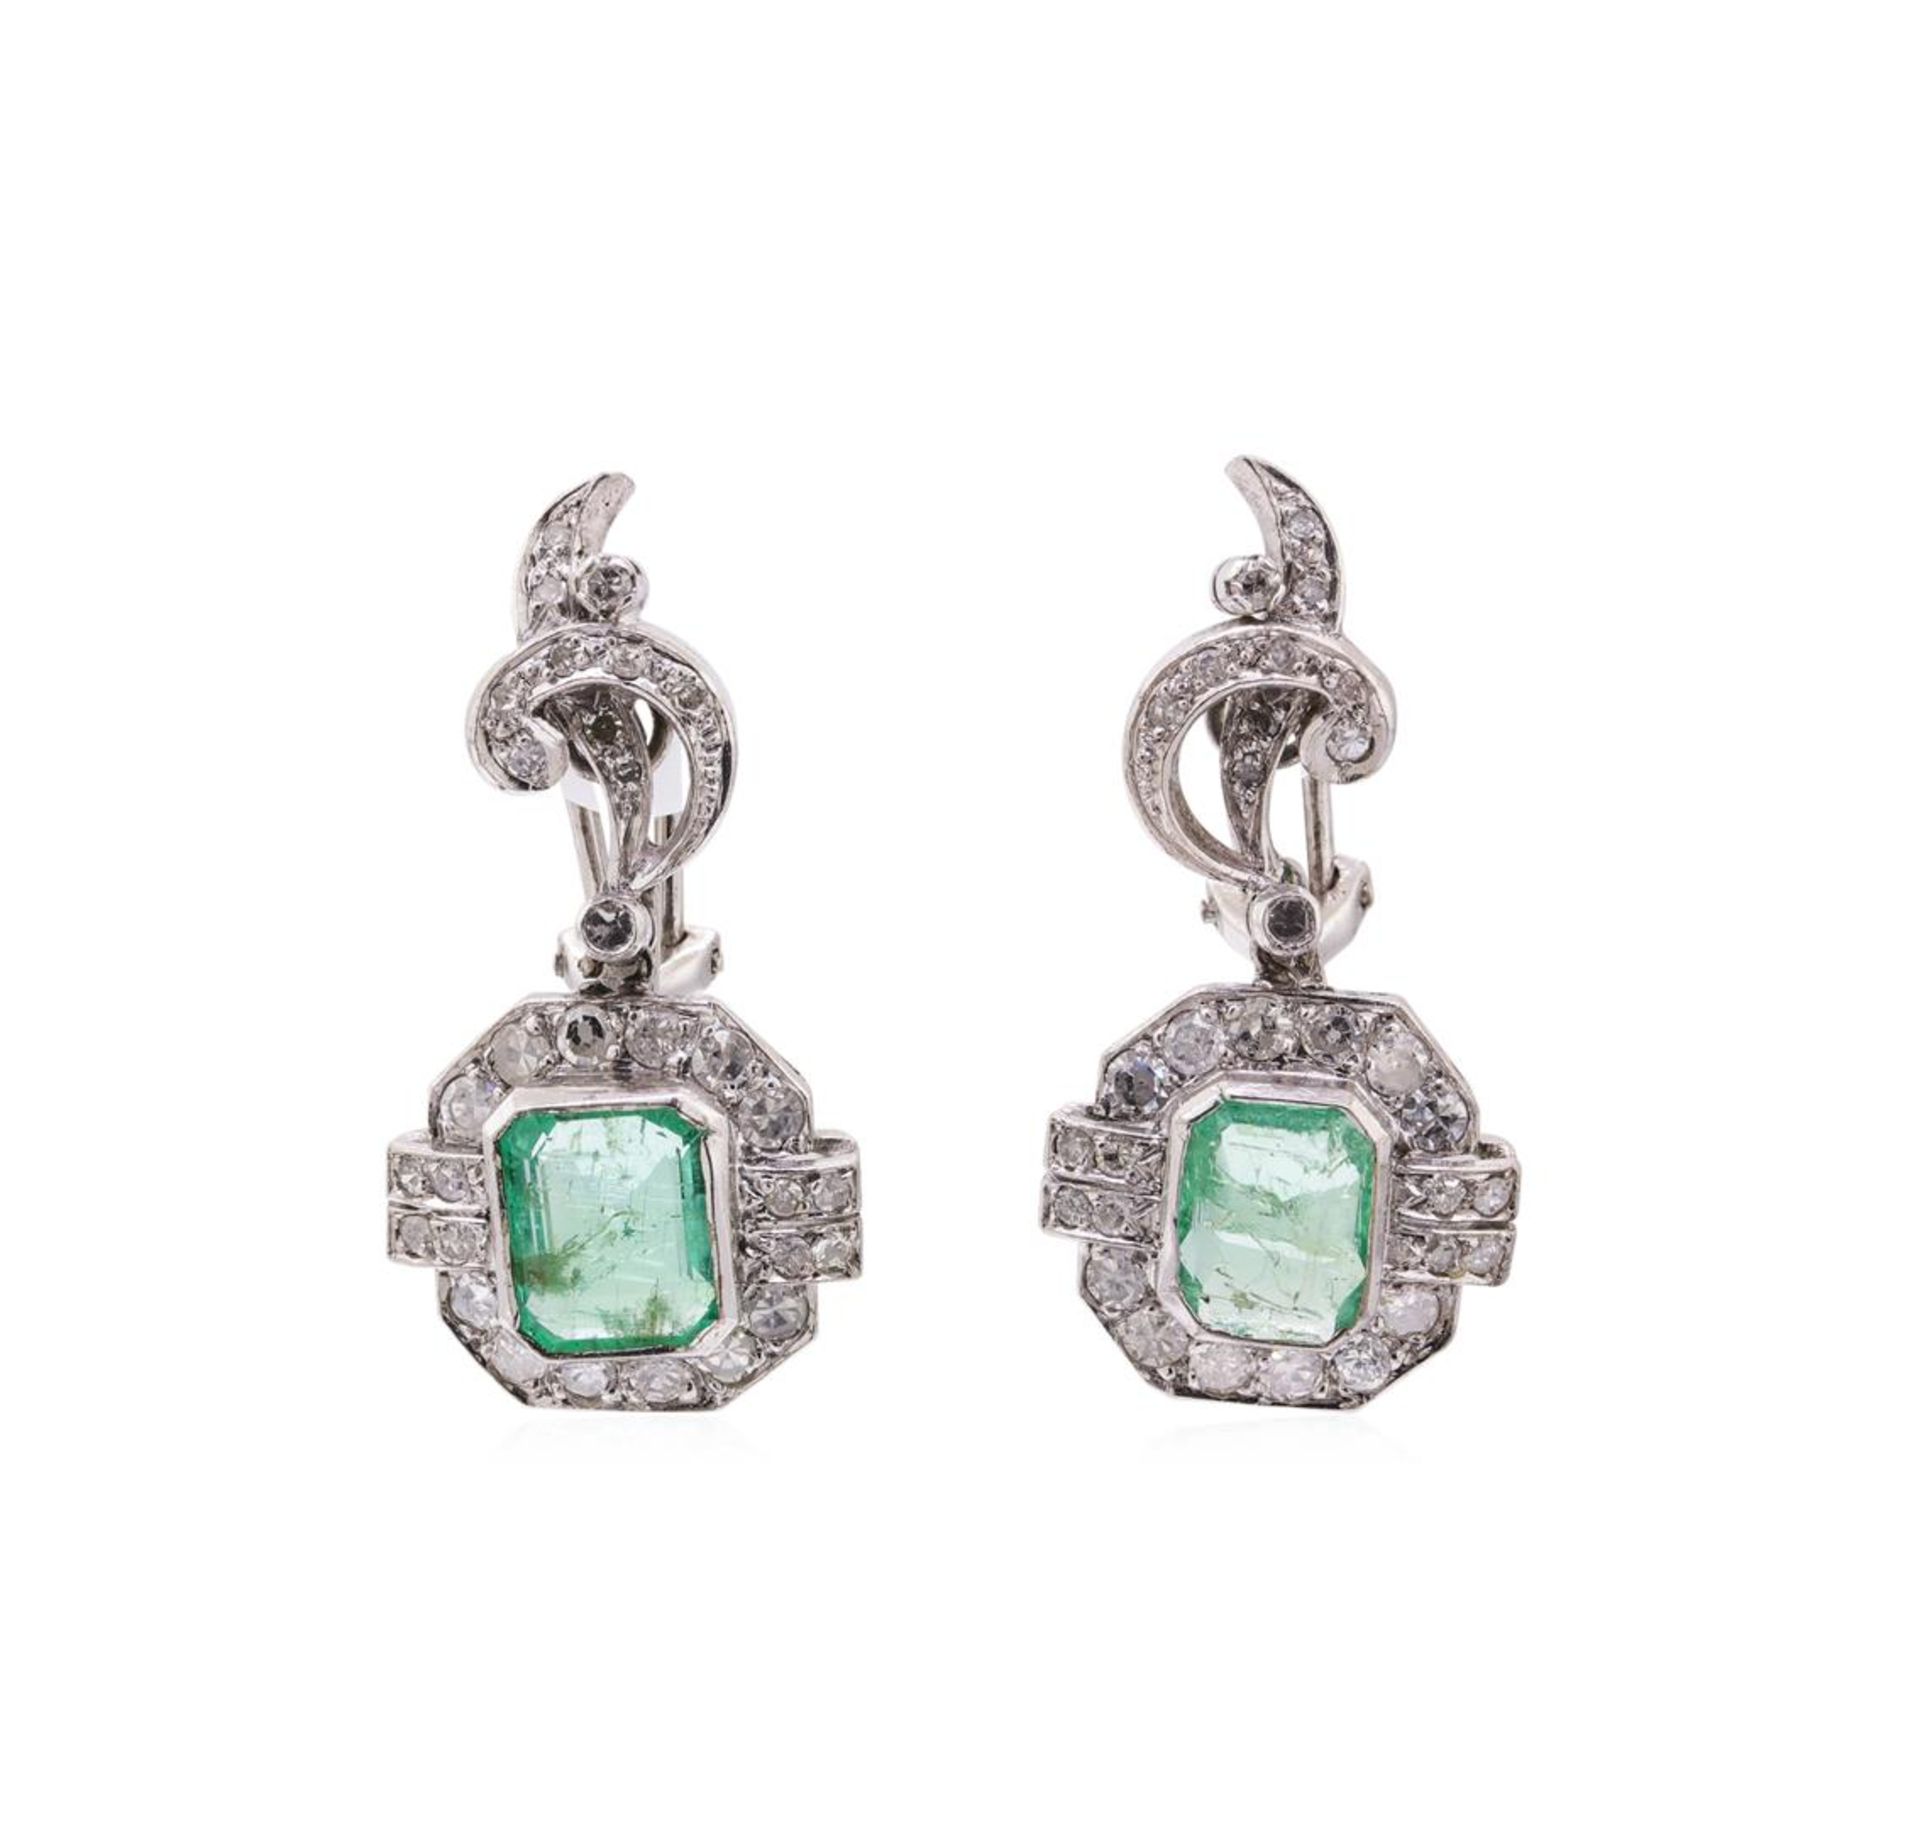 7.80 ctw Emerald And Diamond Ring And Earrings - 14KT White Gold - Image 5 of 7